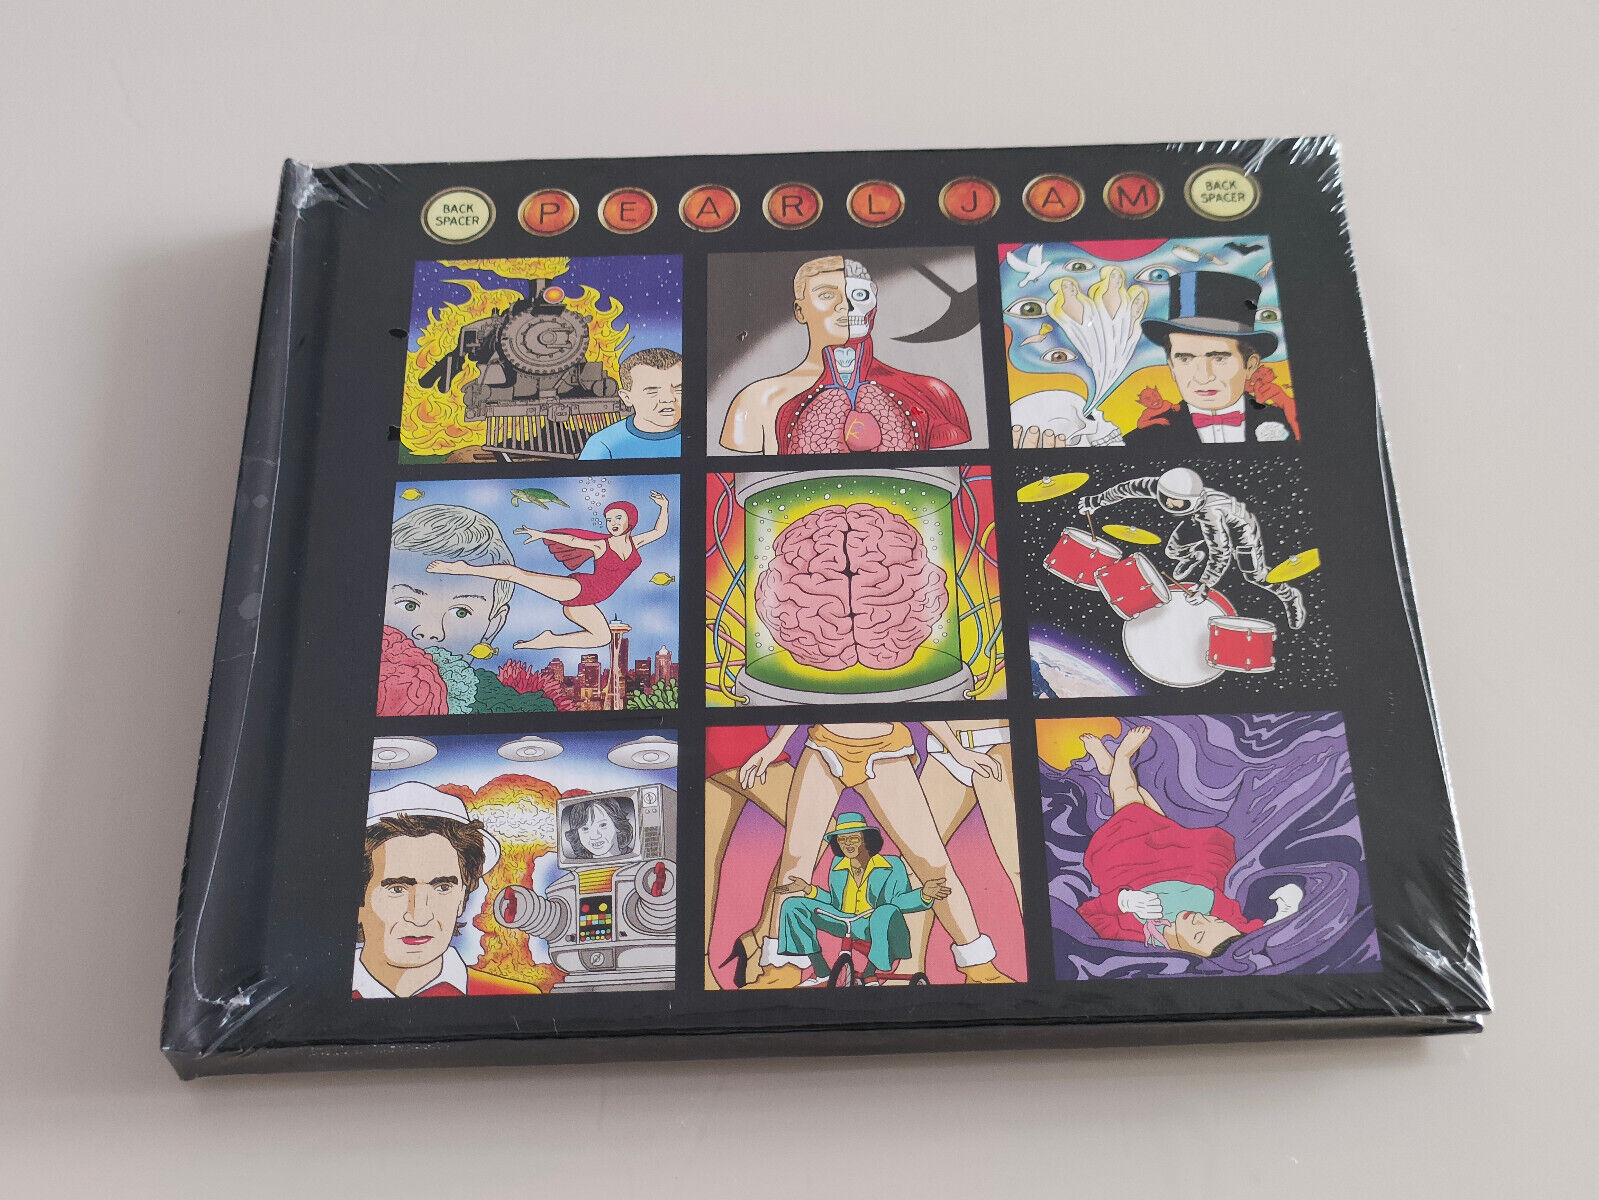 Backspacer by Pearl Jam (CD, Oct-2013, Republic)